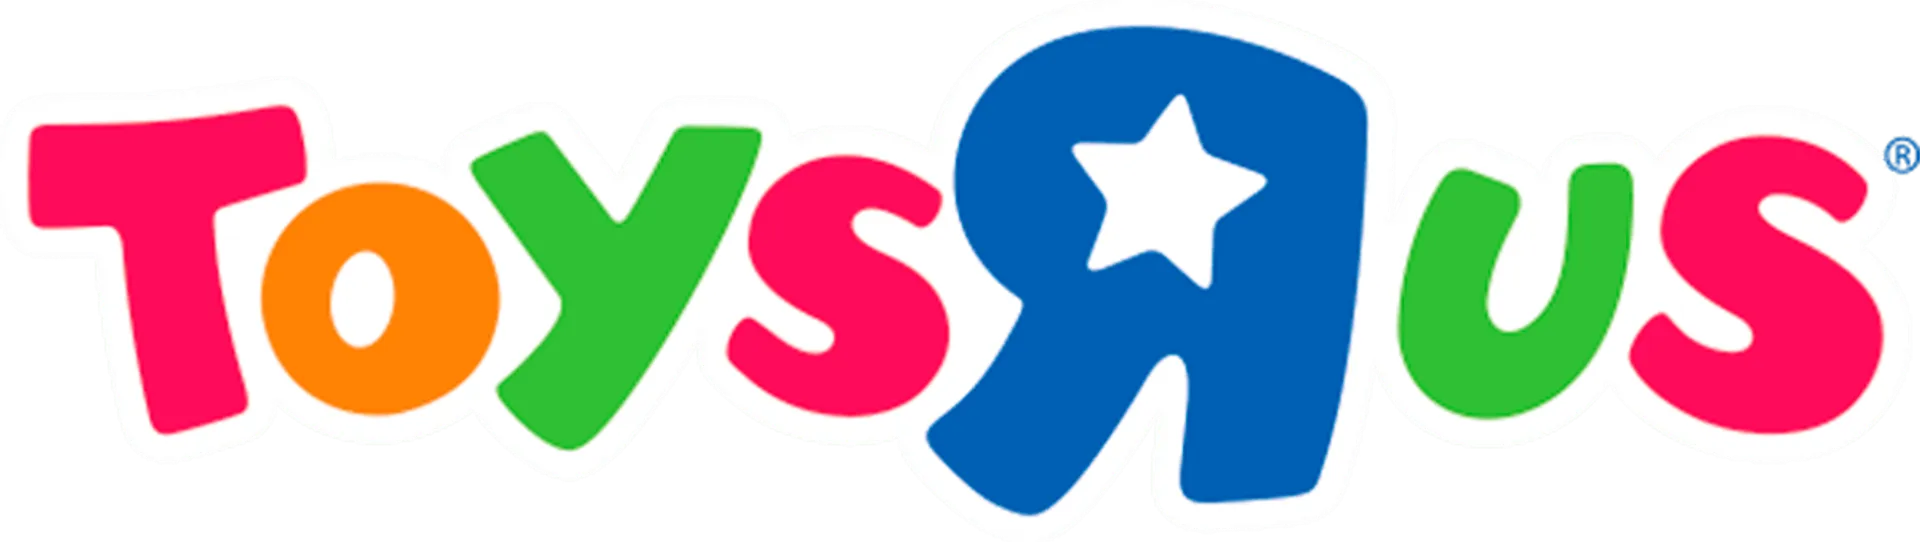 TOYS ”R” US logo current weekly ad